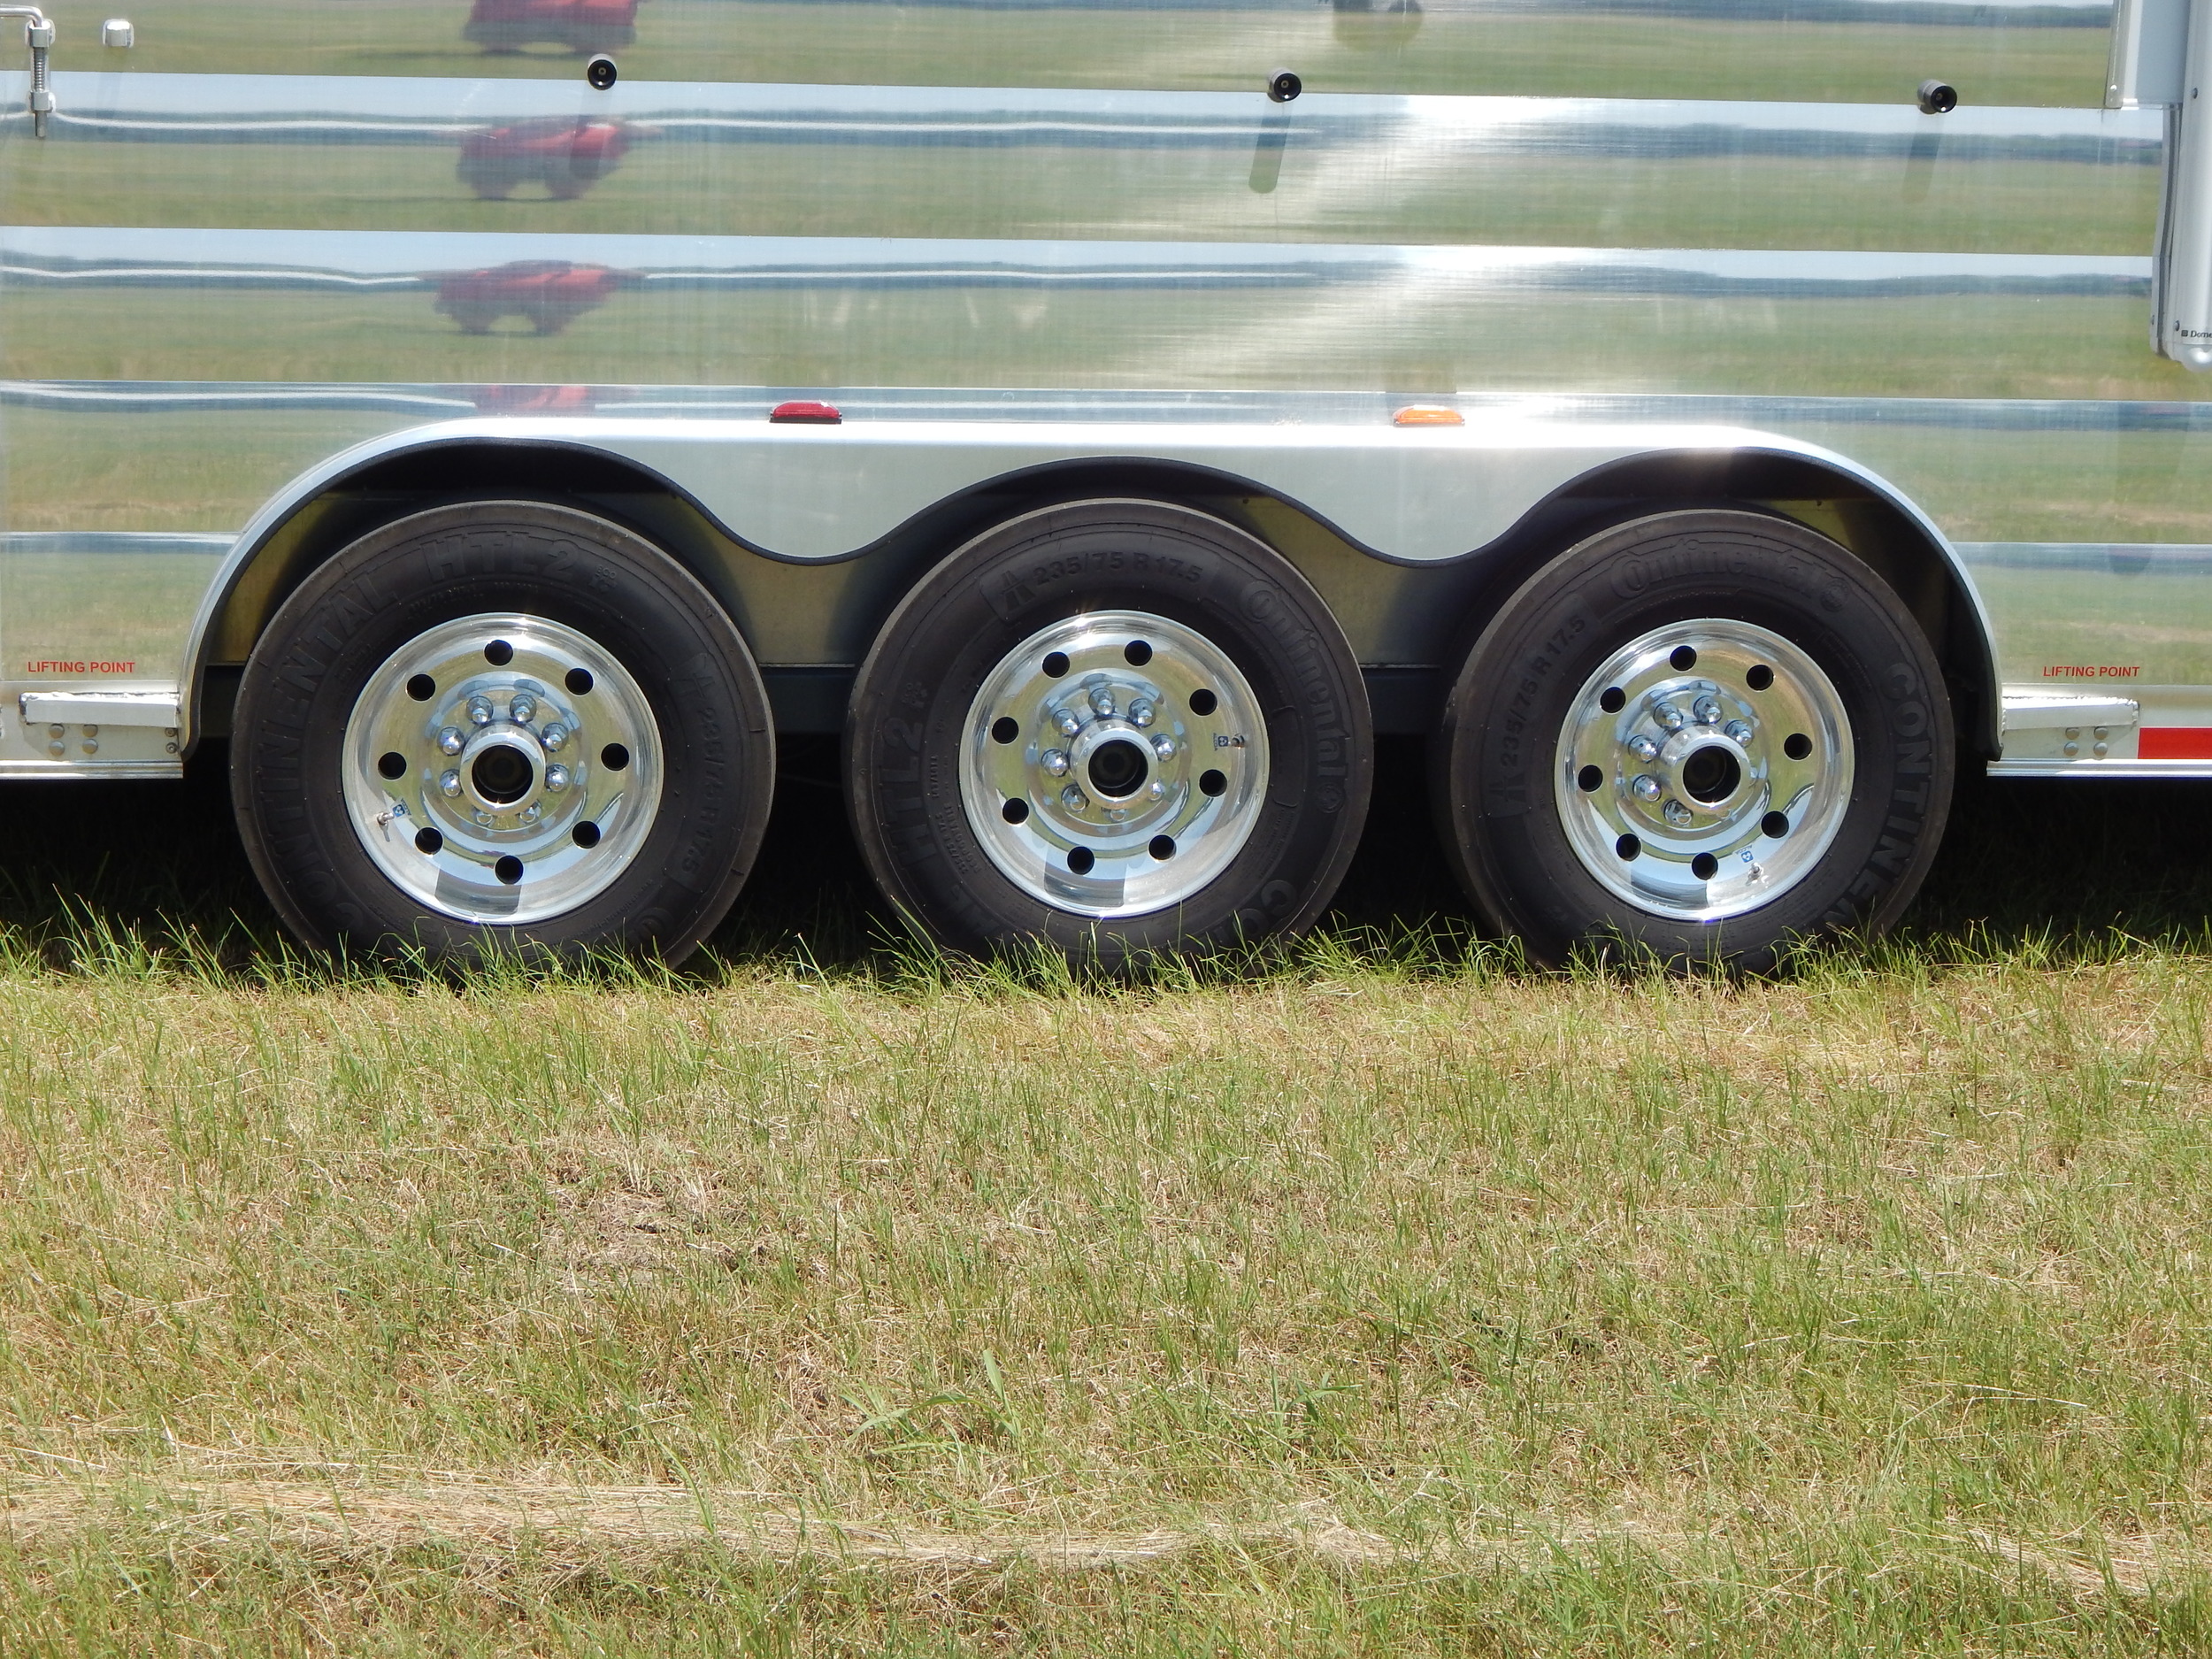 17.5" Alcoa Rims w/ 18 ply Tires<a href=“/area-of-your-site”>→</a><strong></strong>